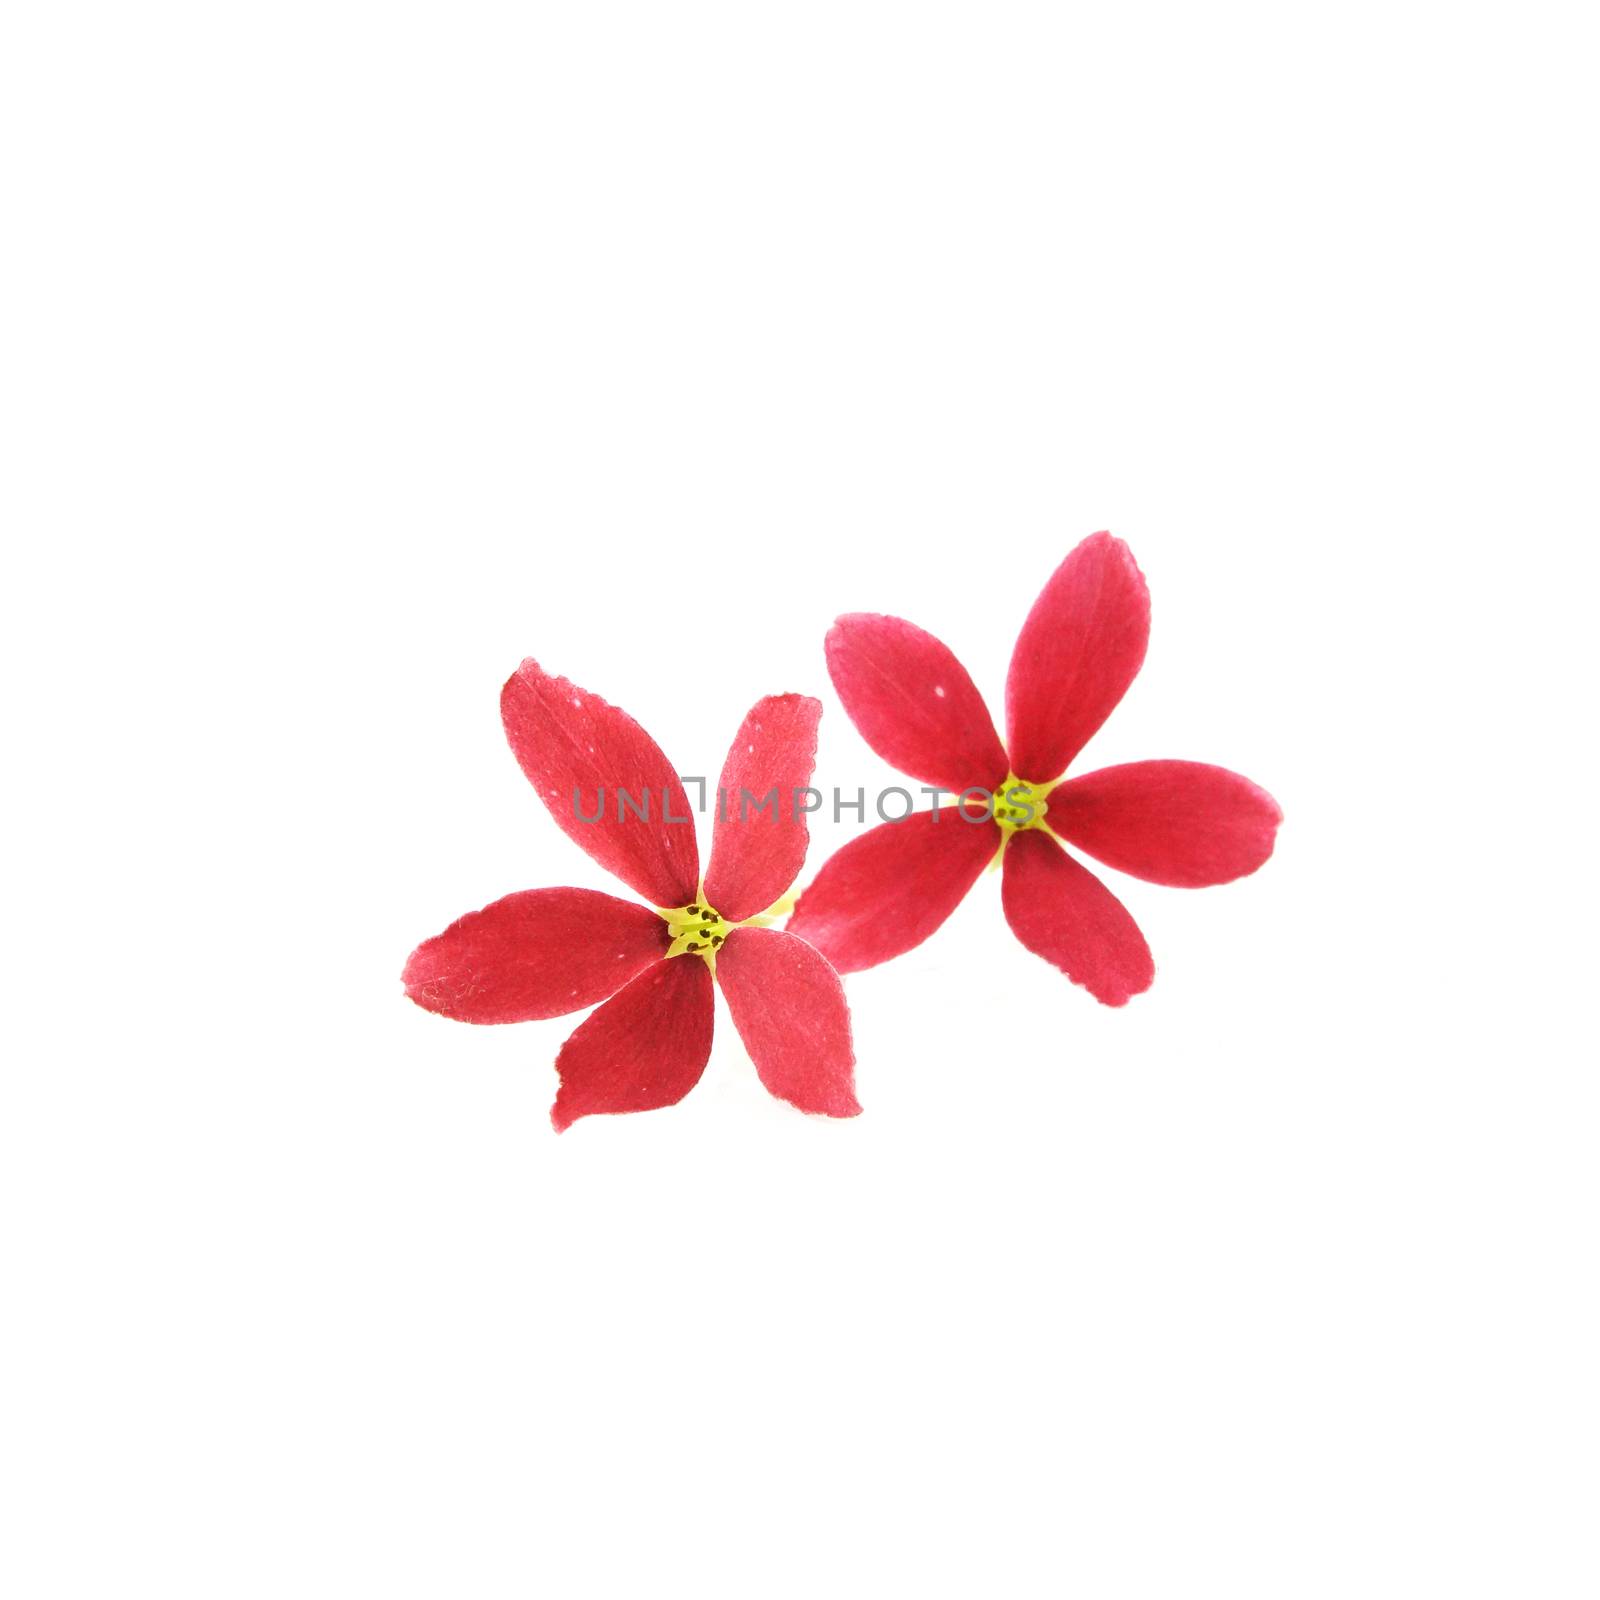 Red flower of Rangoon creeper on white background.